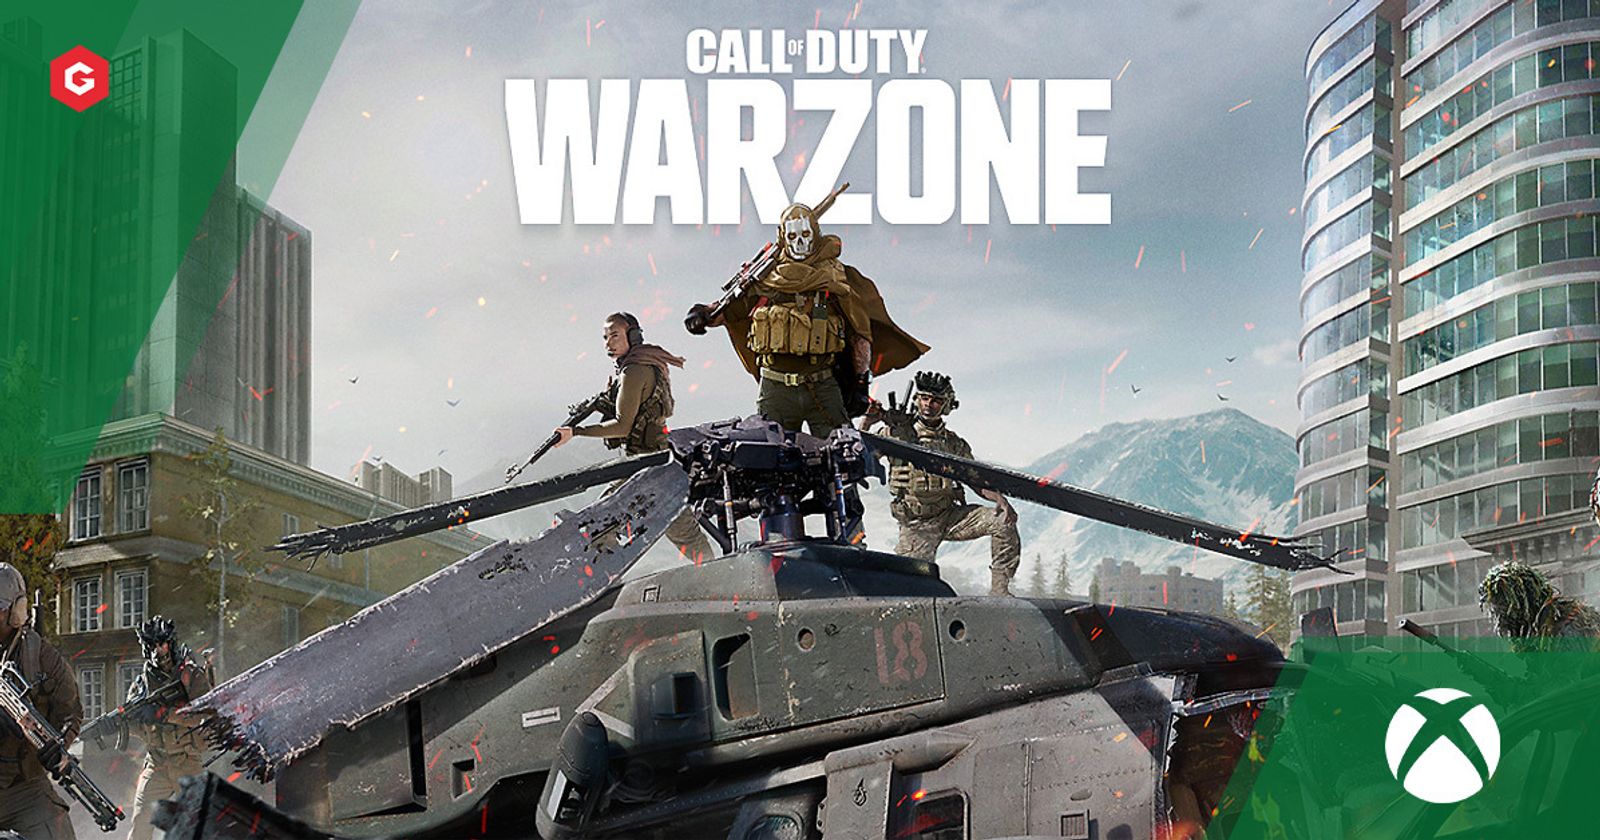 Battle.net Slow Downloads? Here's What to Do to Speed It Up for 'Call of  Duty: Warzone 2